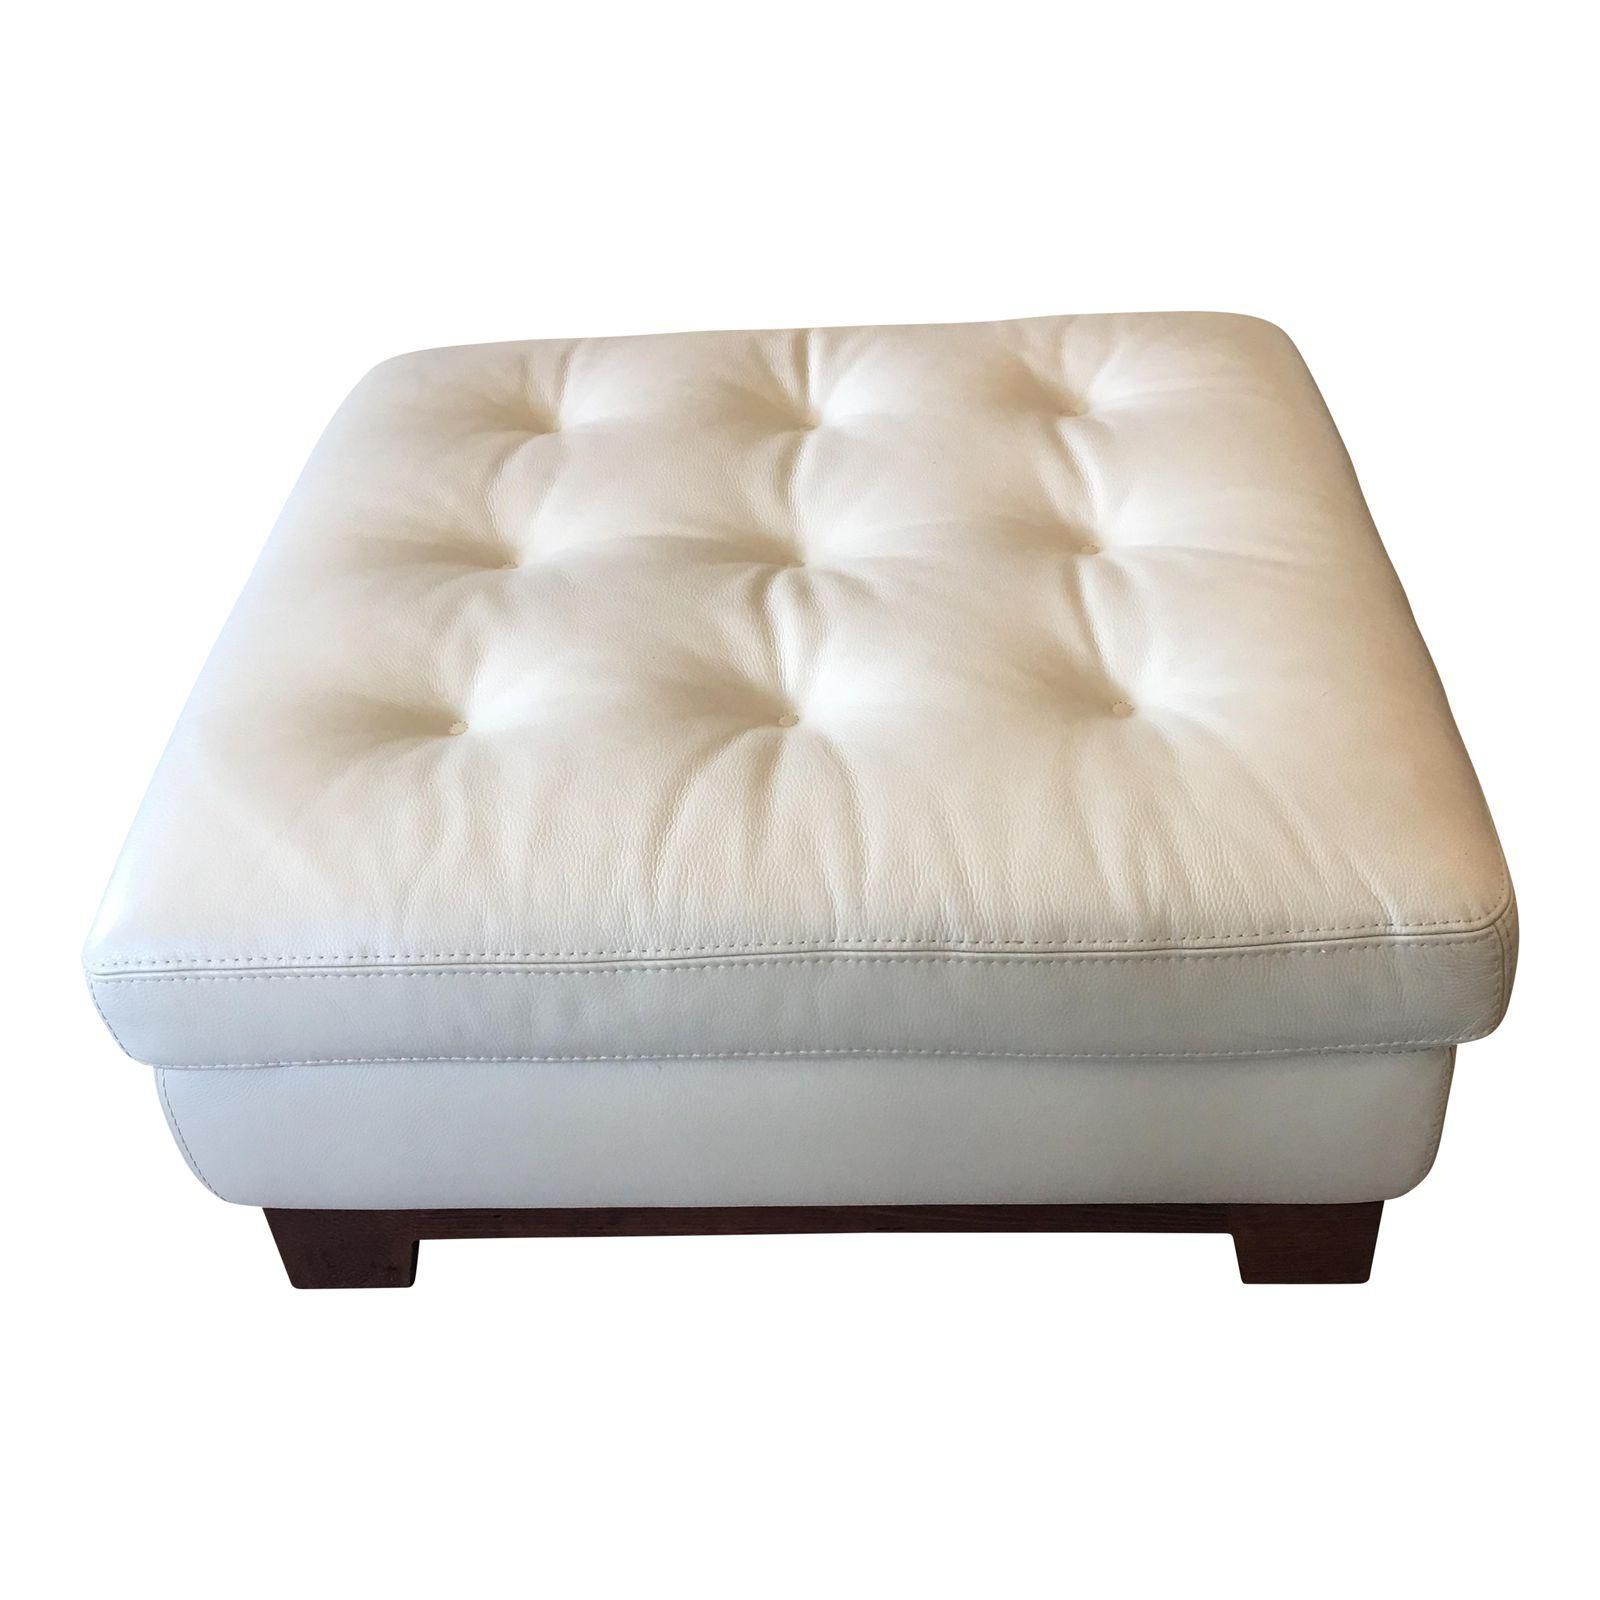 Design Plus Gallery Inside White Leatherette Ottomans (View 5 of 10)